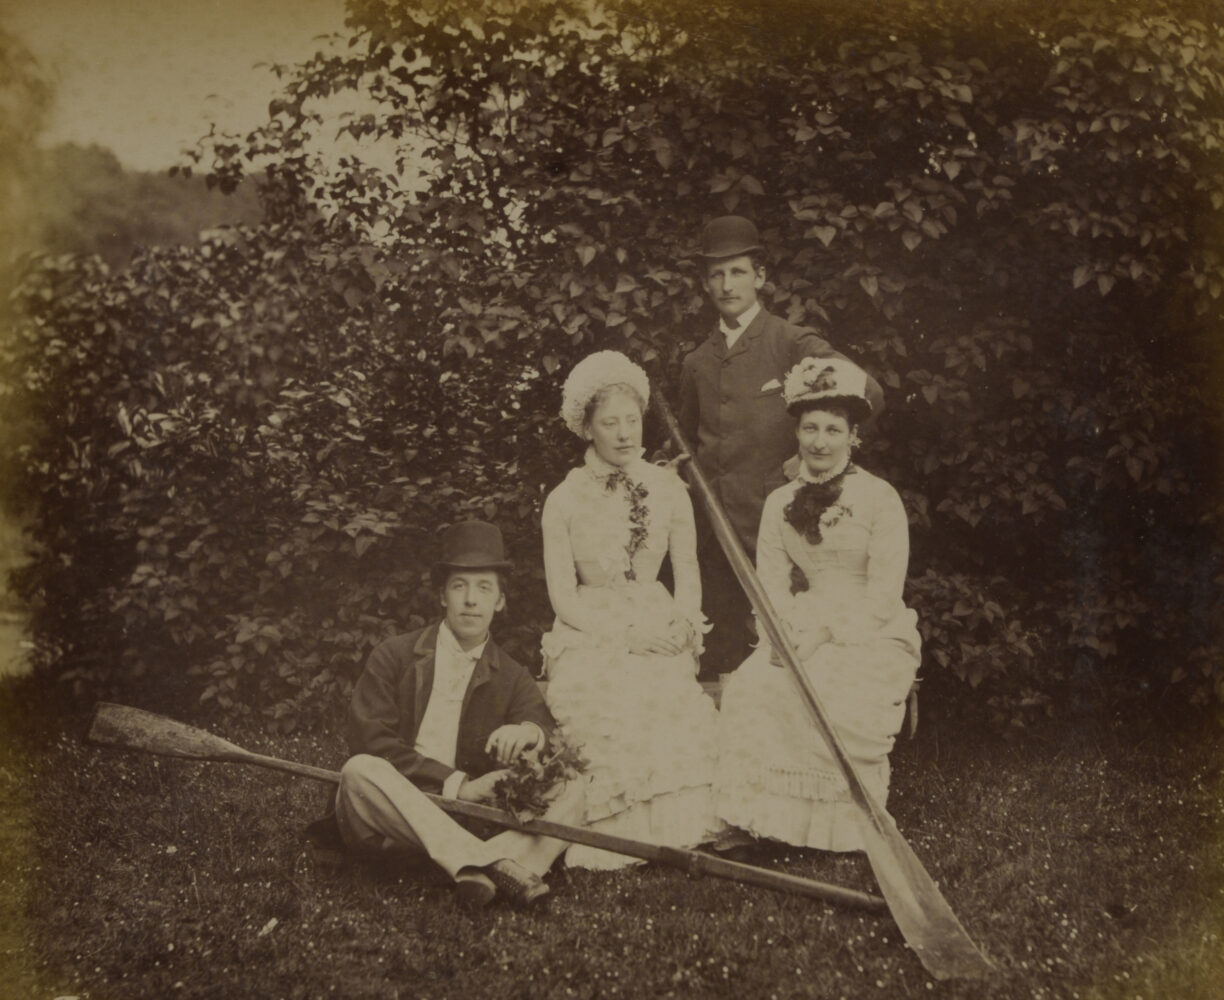 Photograph of Oscar Wilde, Florence Ward (centre), Gertrude Ward and an unidentified gentleman by Jules Guggenheim, 1876. Magdalen College Archives Acc99/62